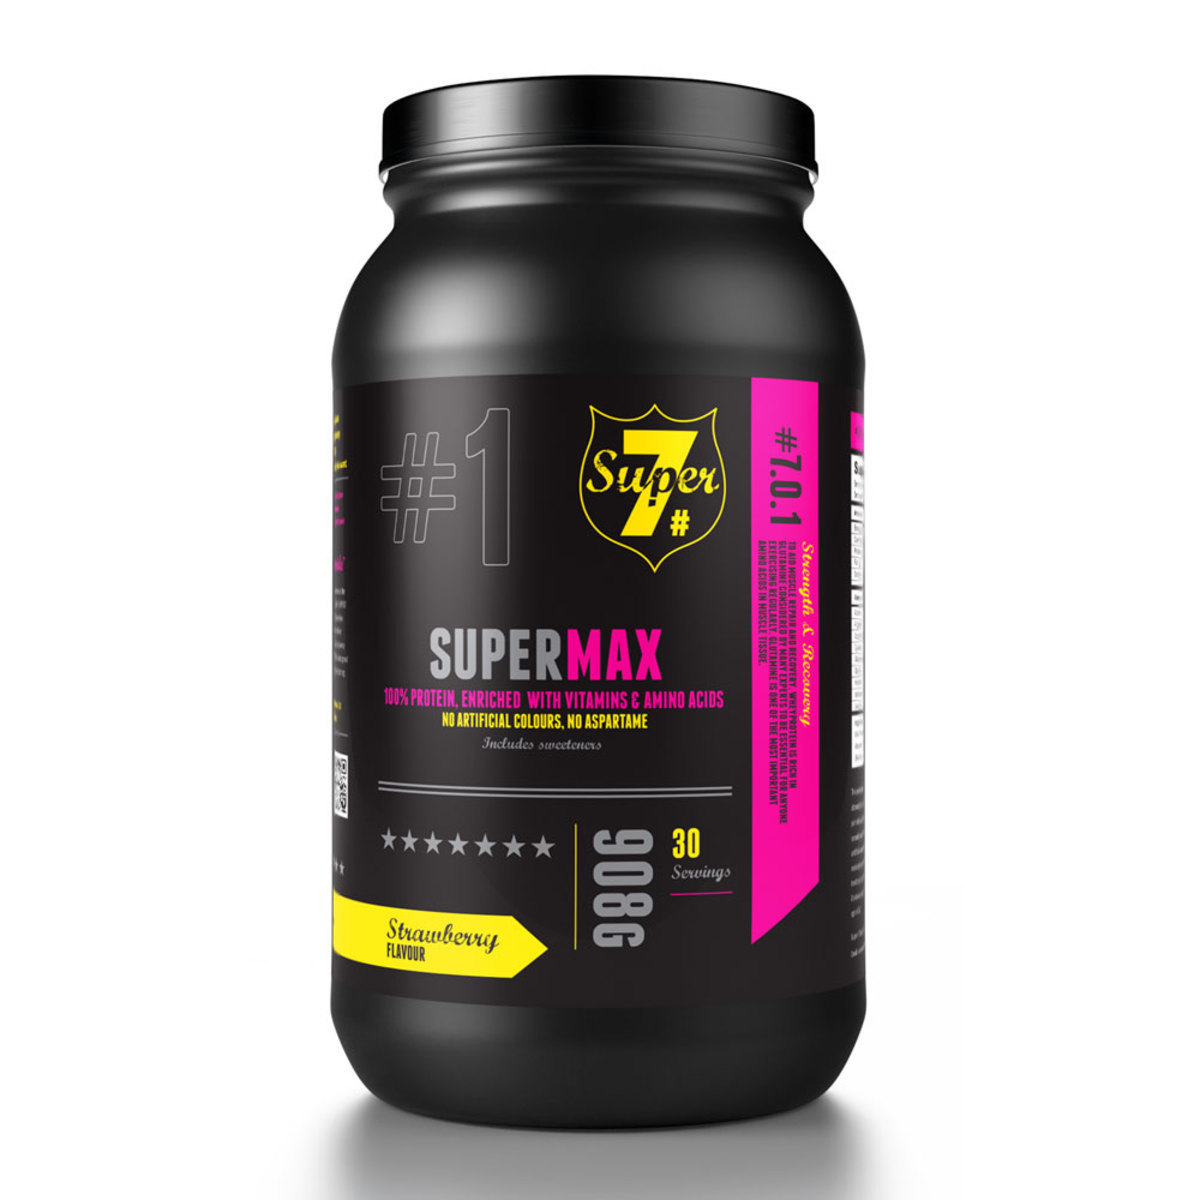 Super7 Super Max Protein Blend Strawberry Flavour, 908g (30 Servings)